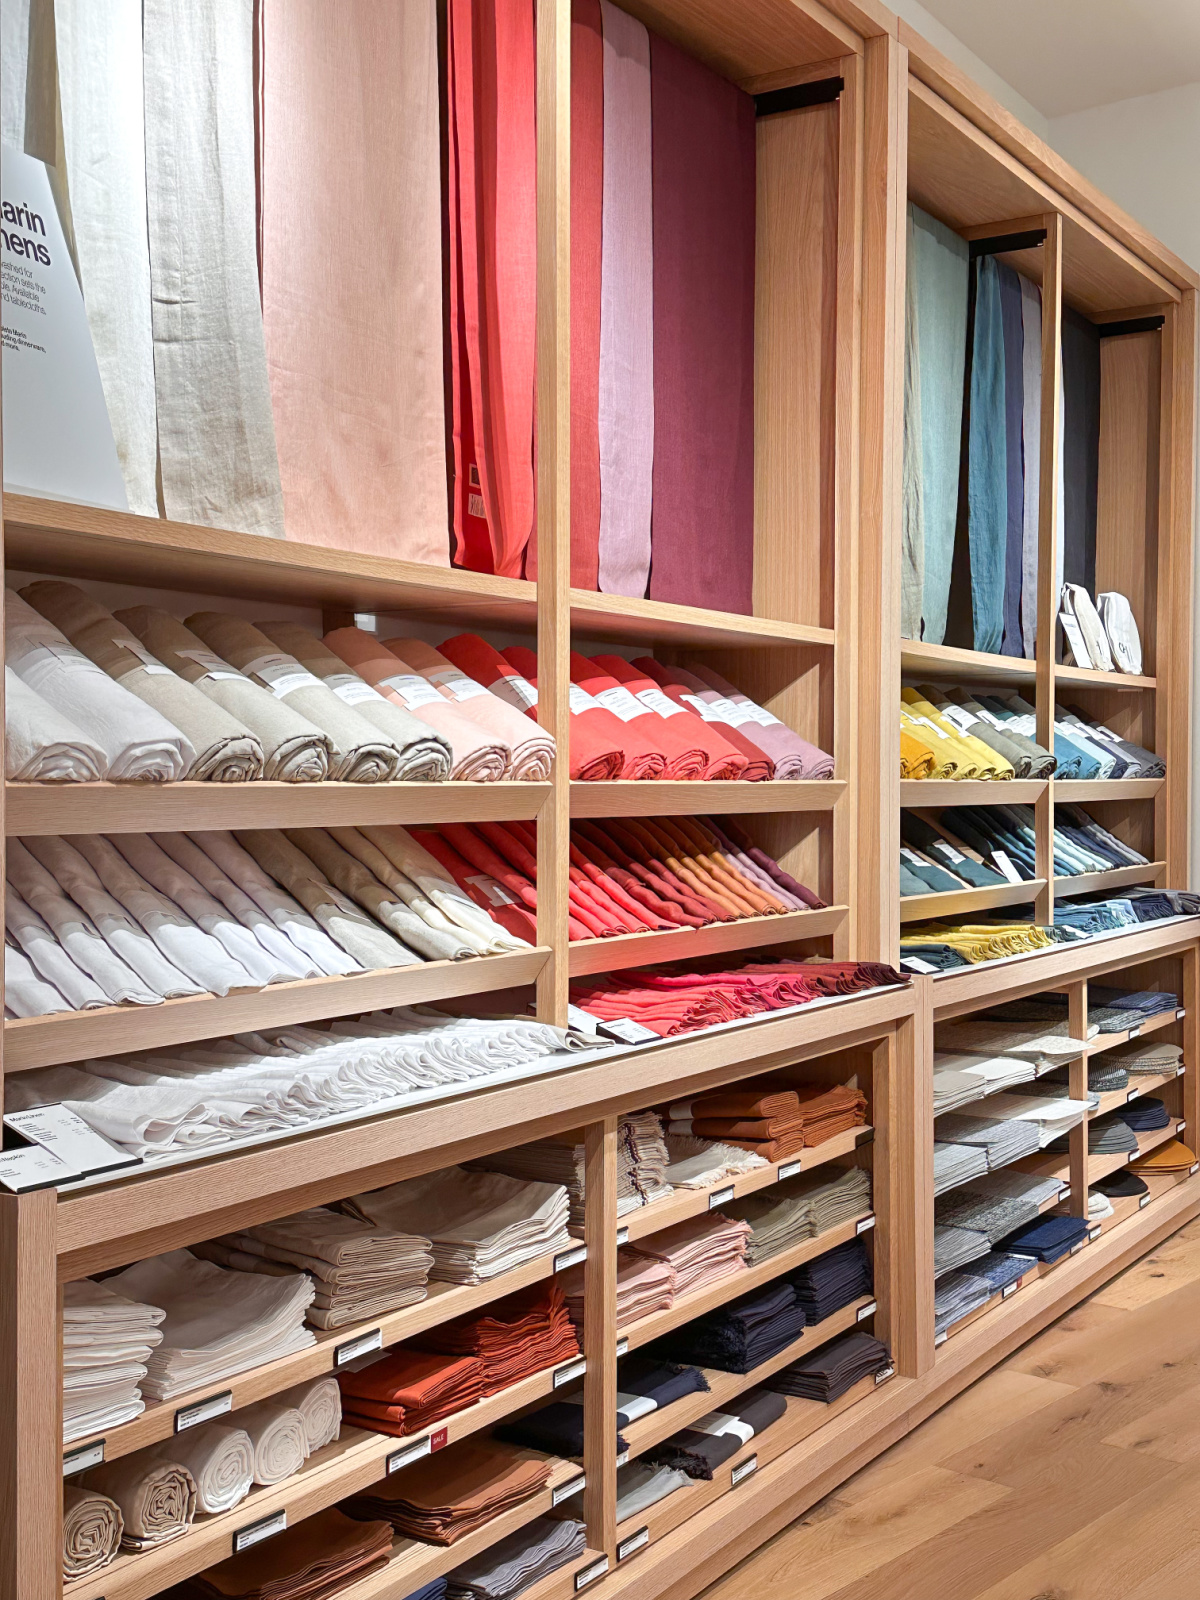 Shelves full of colorful linens at Crate & Barrel.